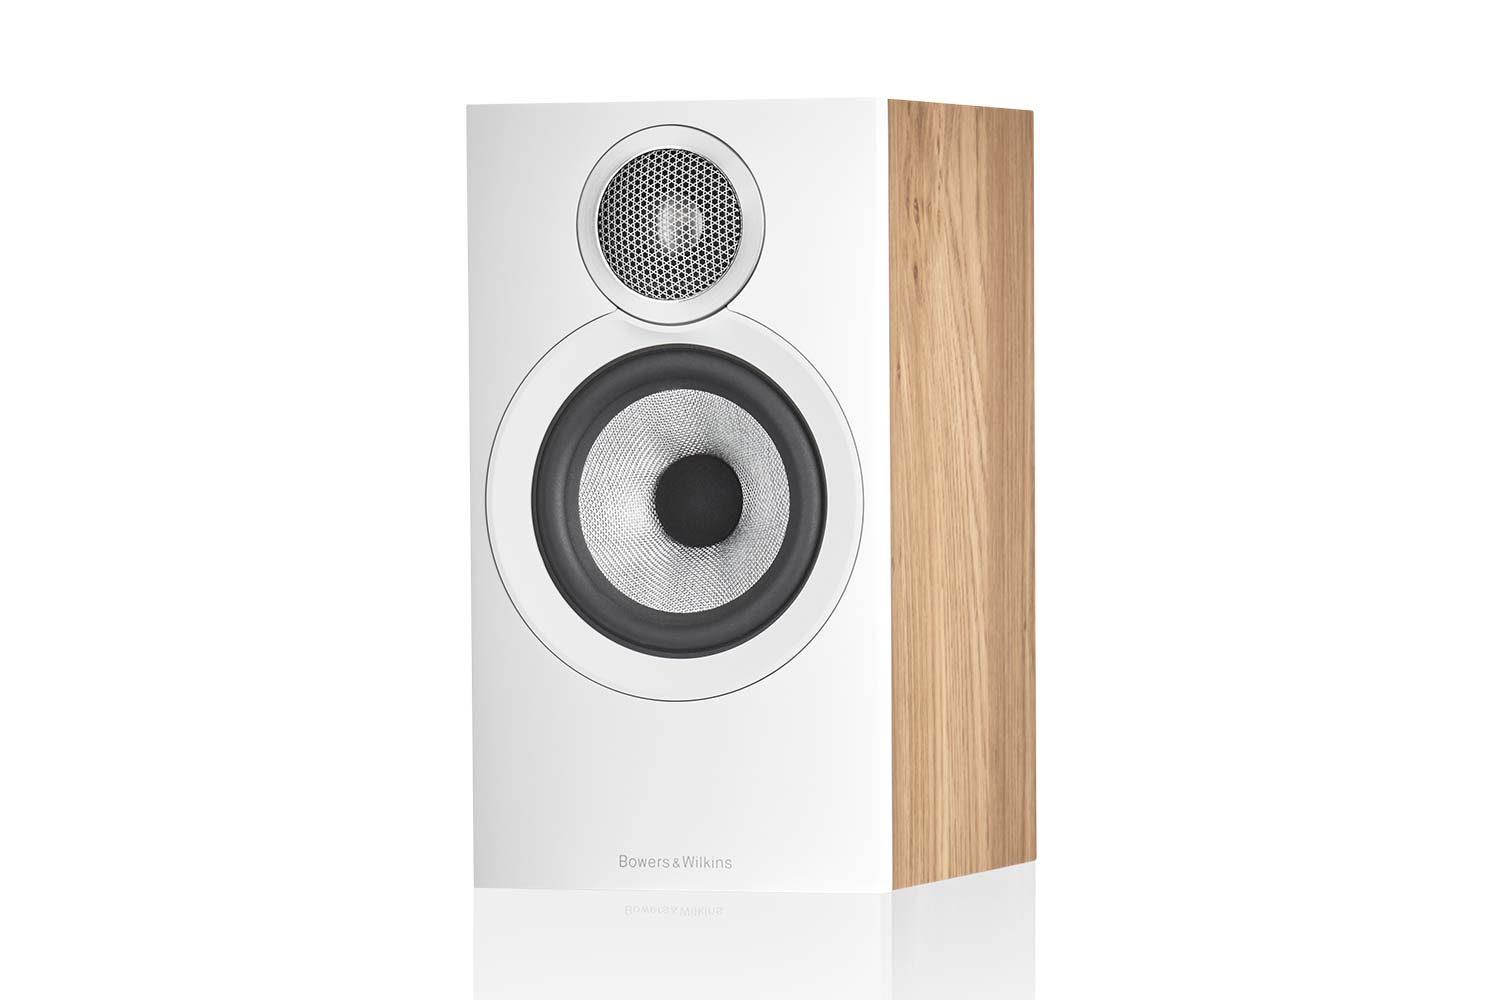 Bowers & Wilkins S607 S3 eiche607s3 